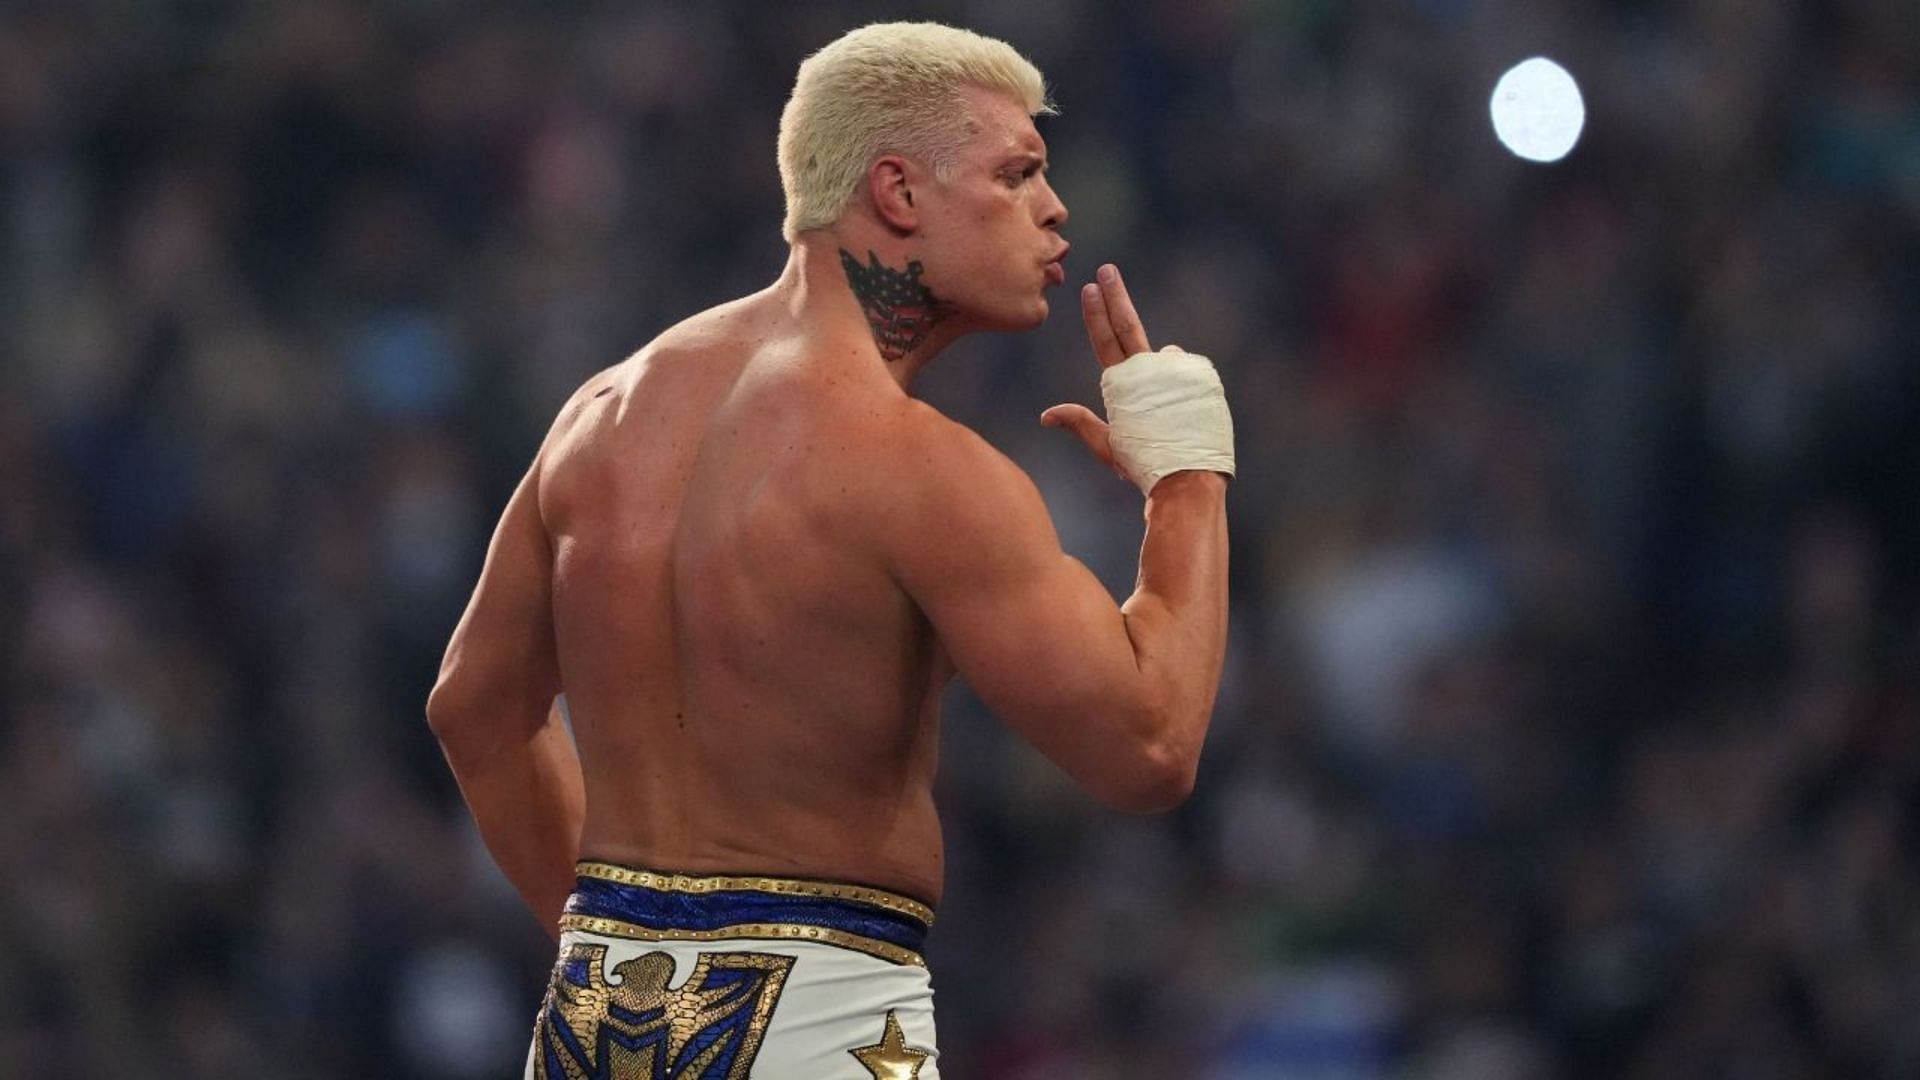 Cody Rhodes suffered a new injury at WWE Royal Rumble